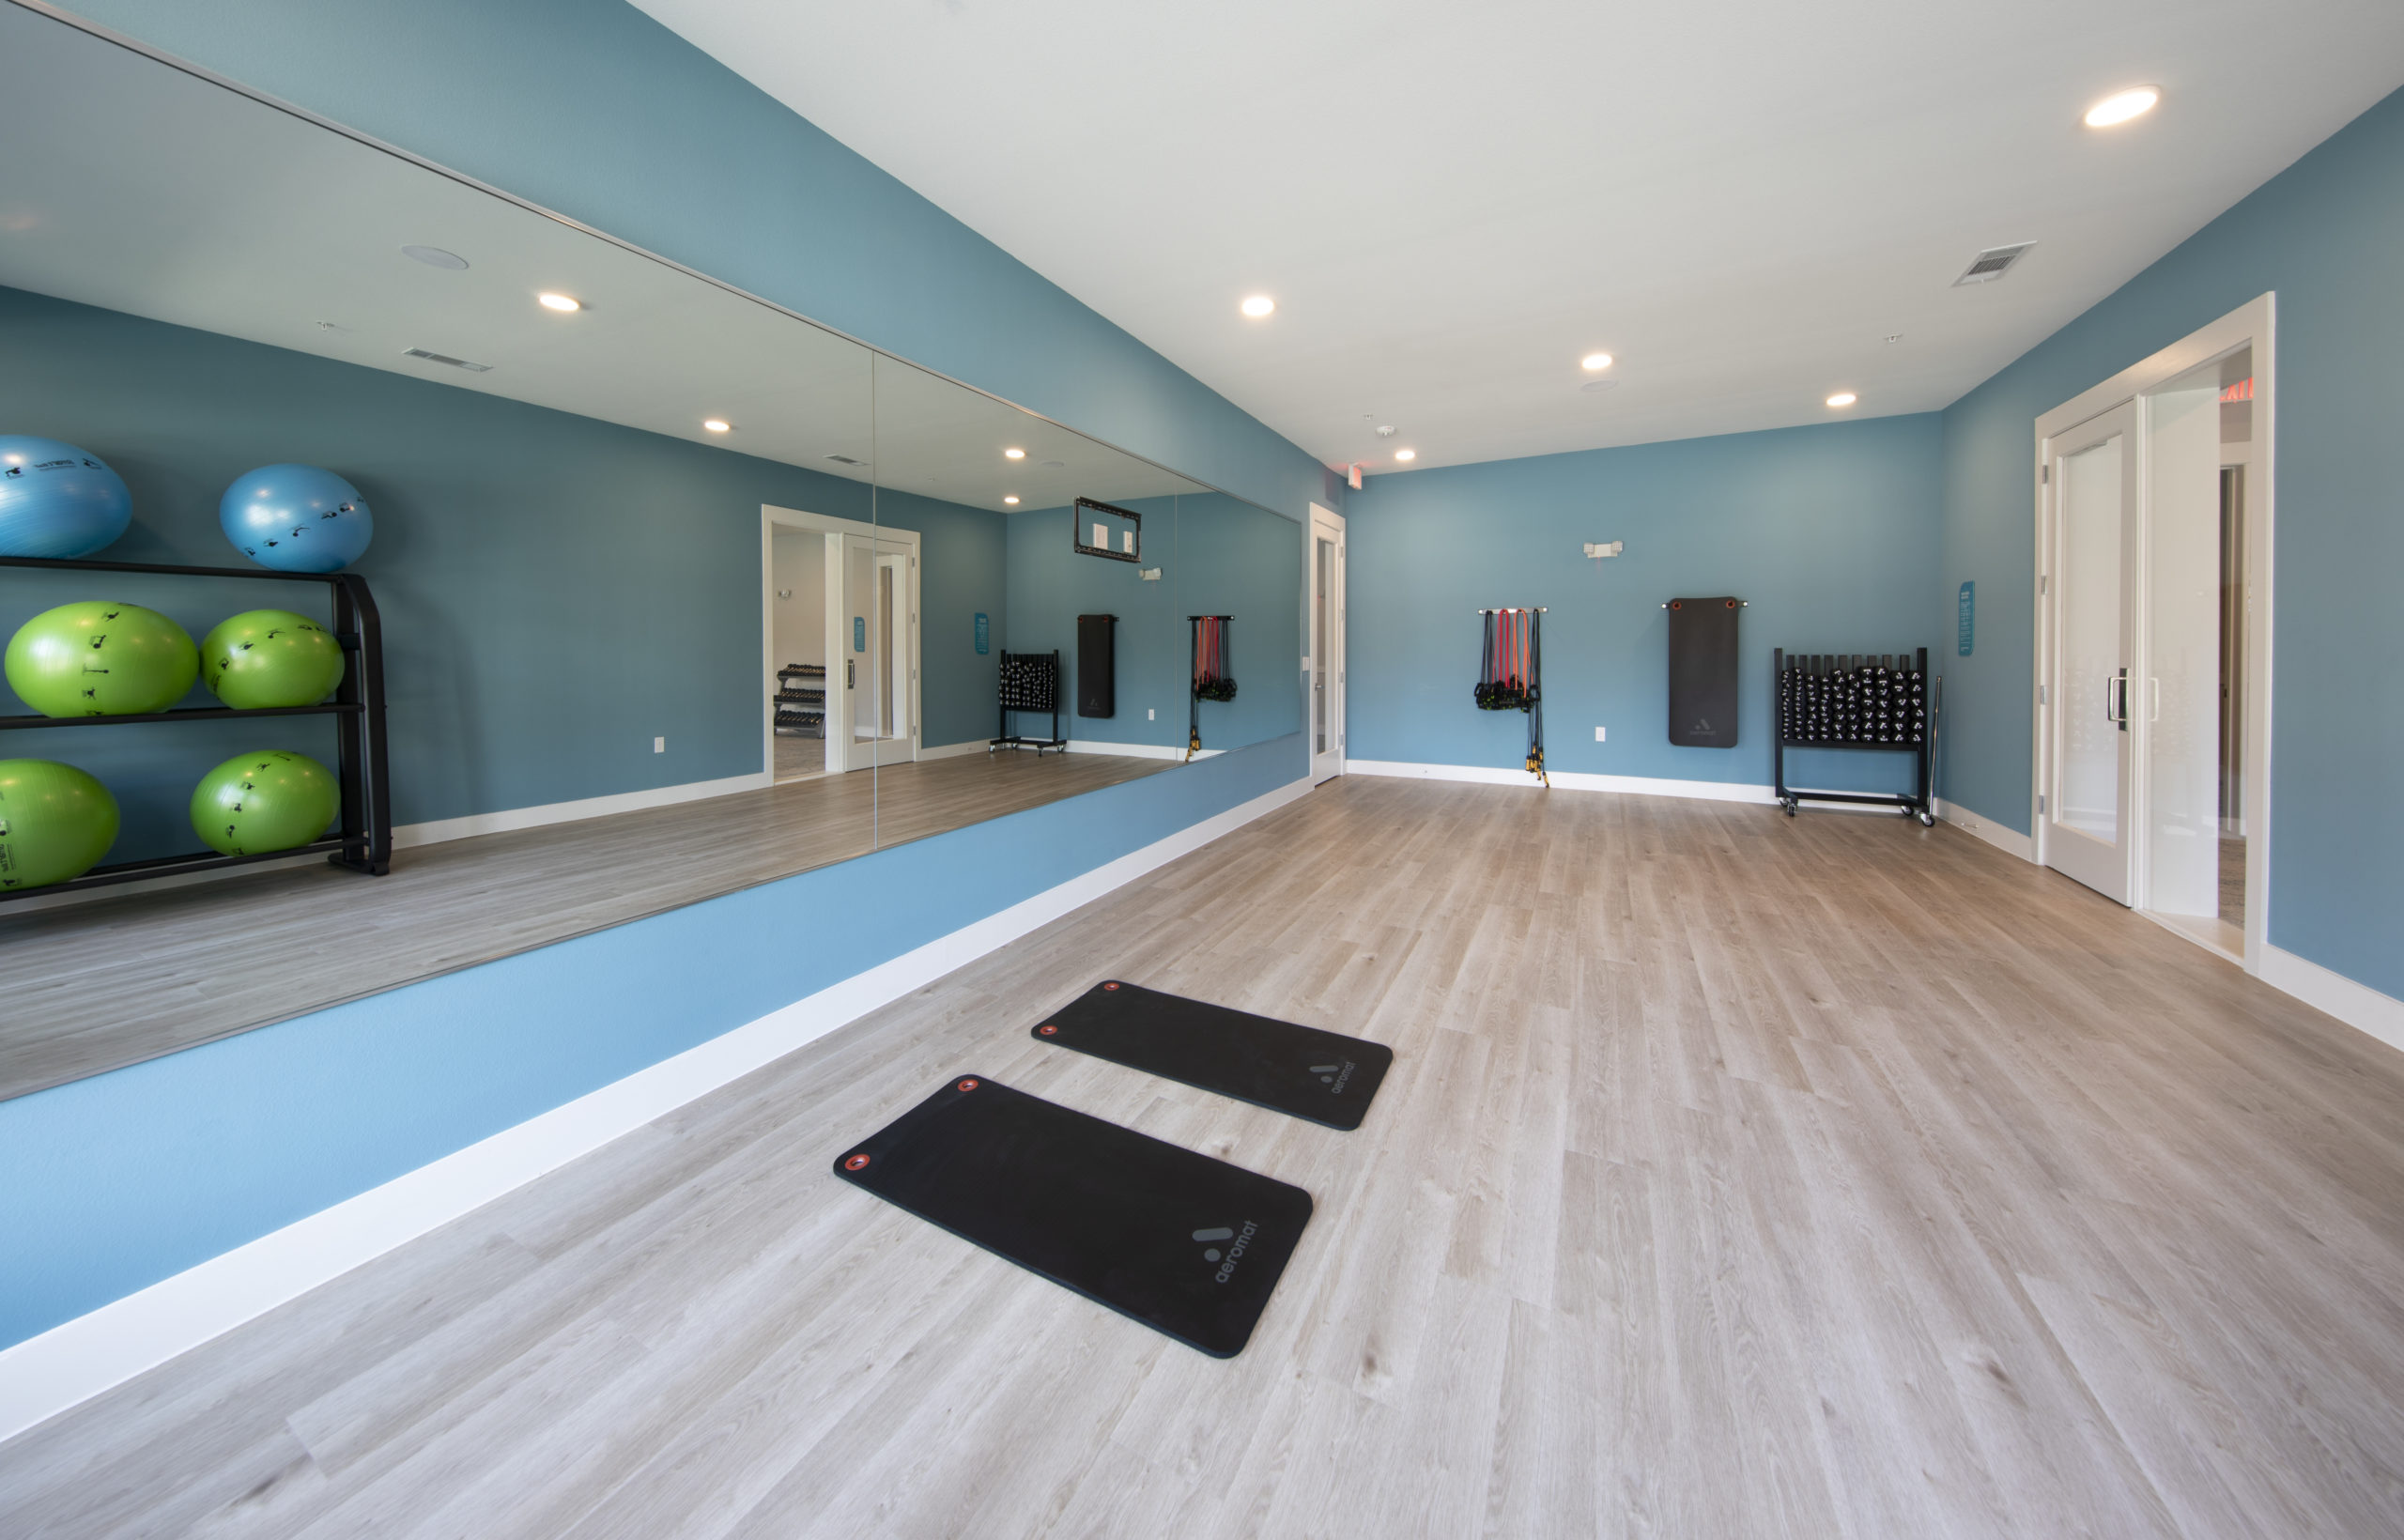 24 Hour Stand-Alone Wellness and Fitness Studio at Mera Vintage Park in Houston Texas